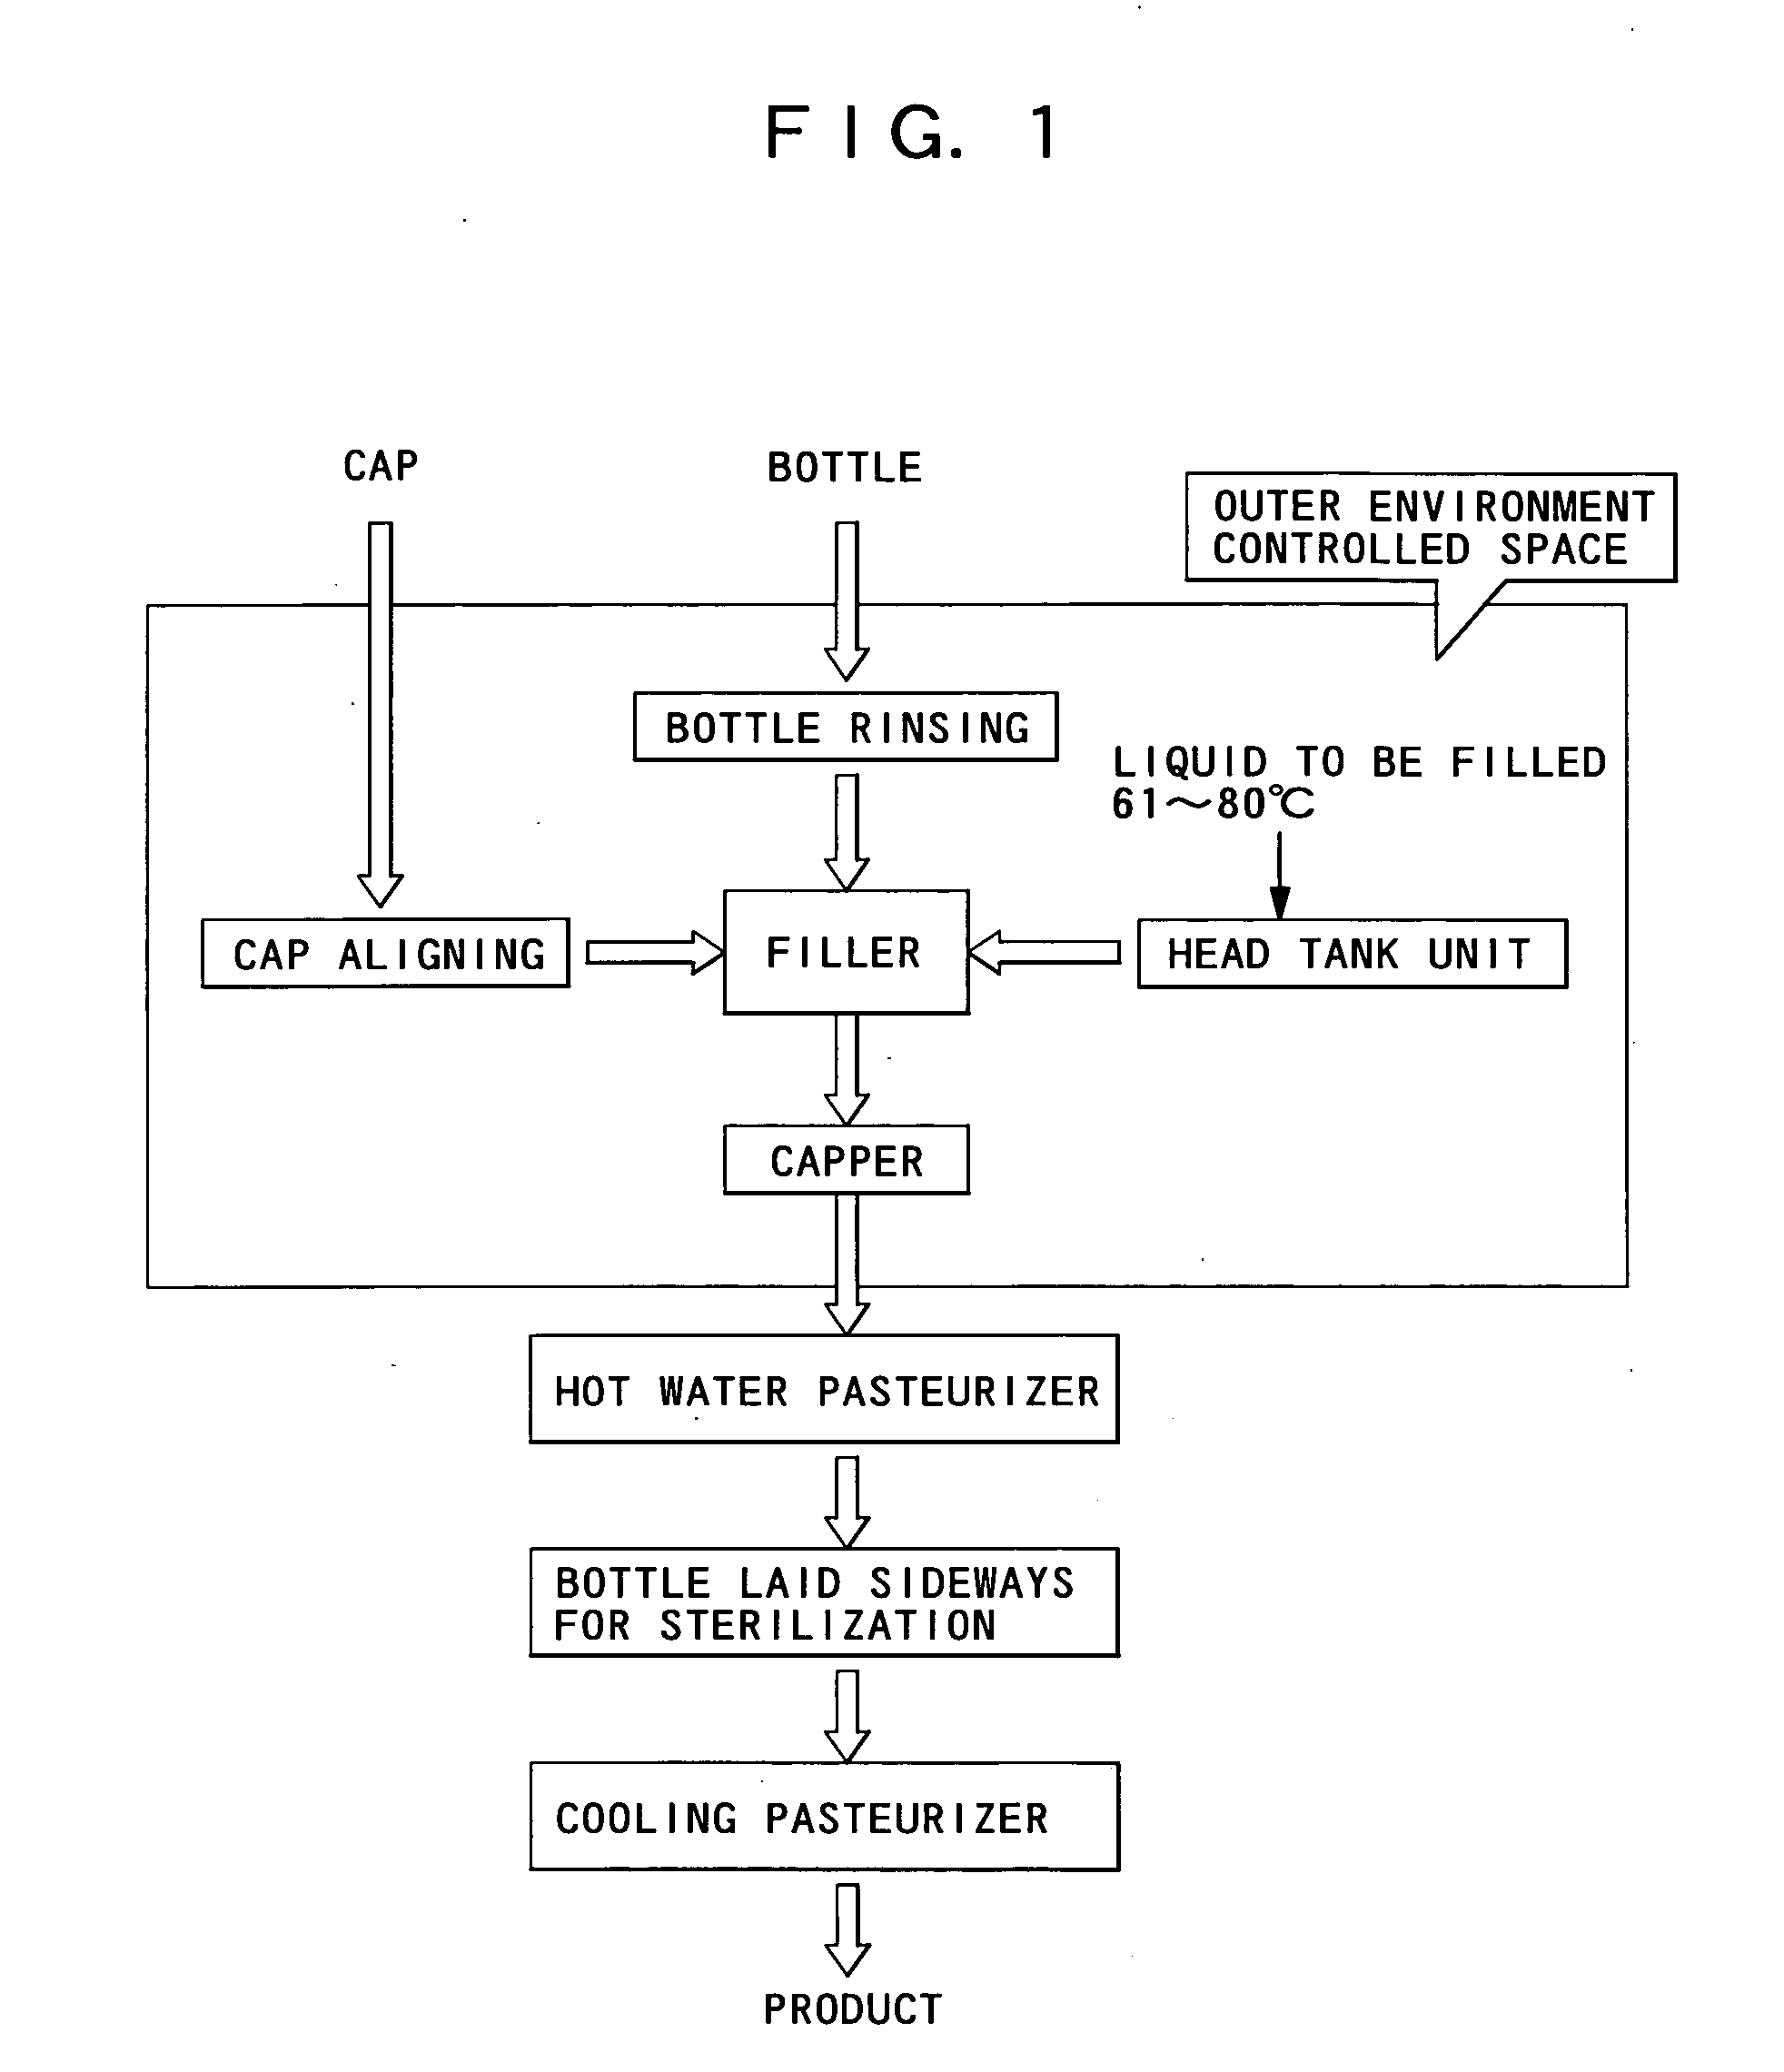 Method for manufacturing contents contained in a container